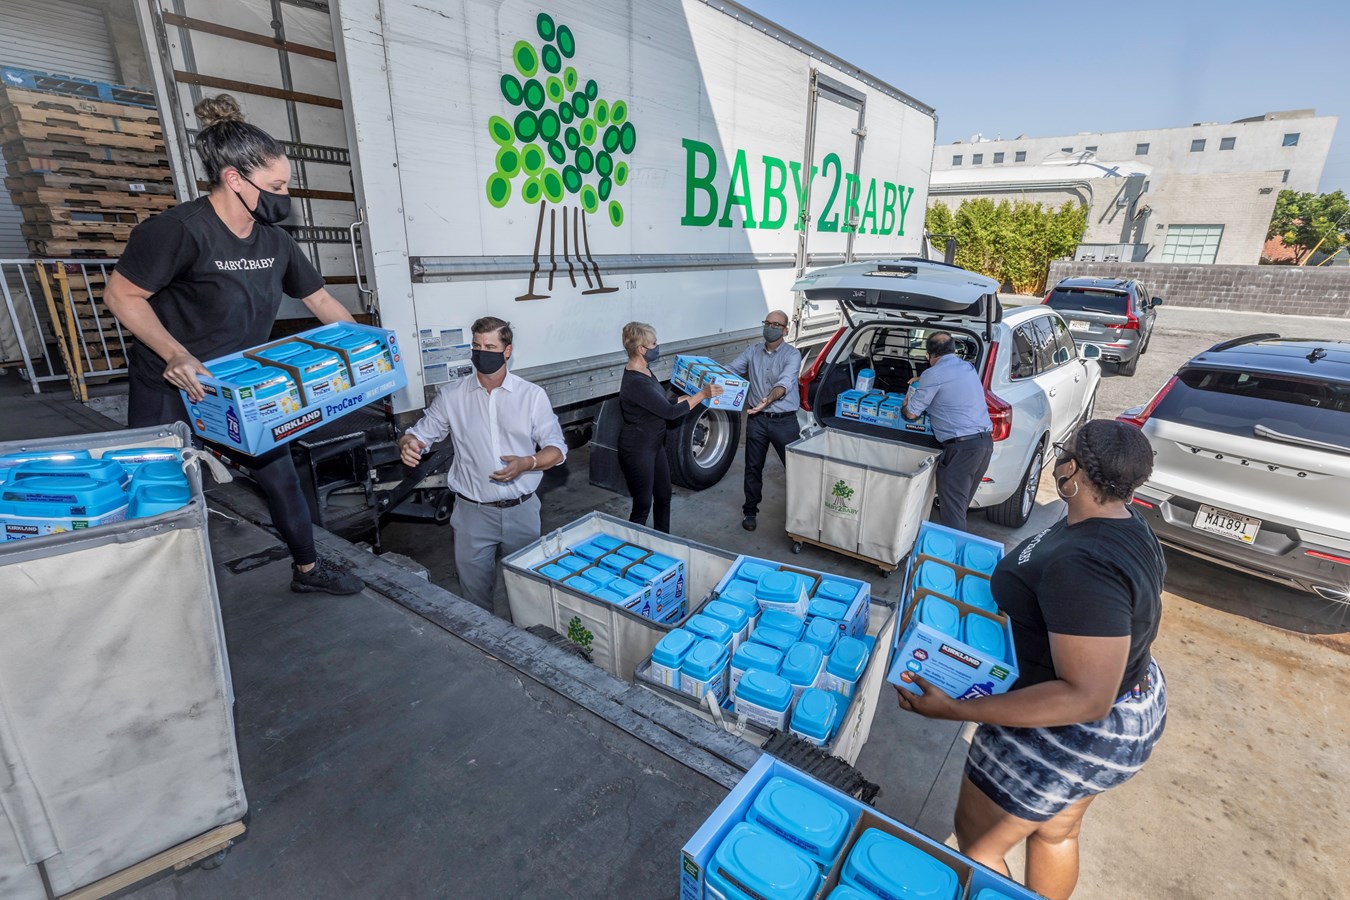 Southern California Volvo retailers donate nearly $50,000 to feed babies in need amidst COVID-19 and wildfires